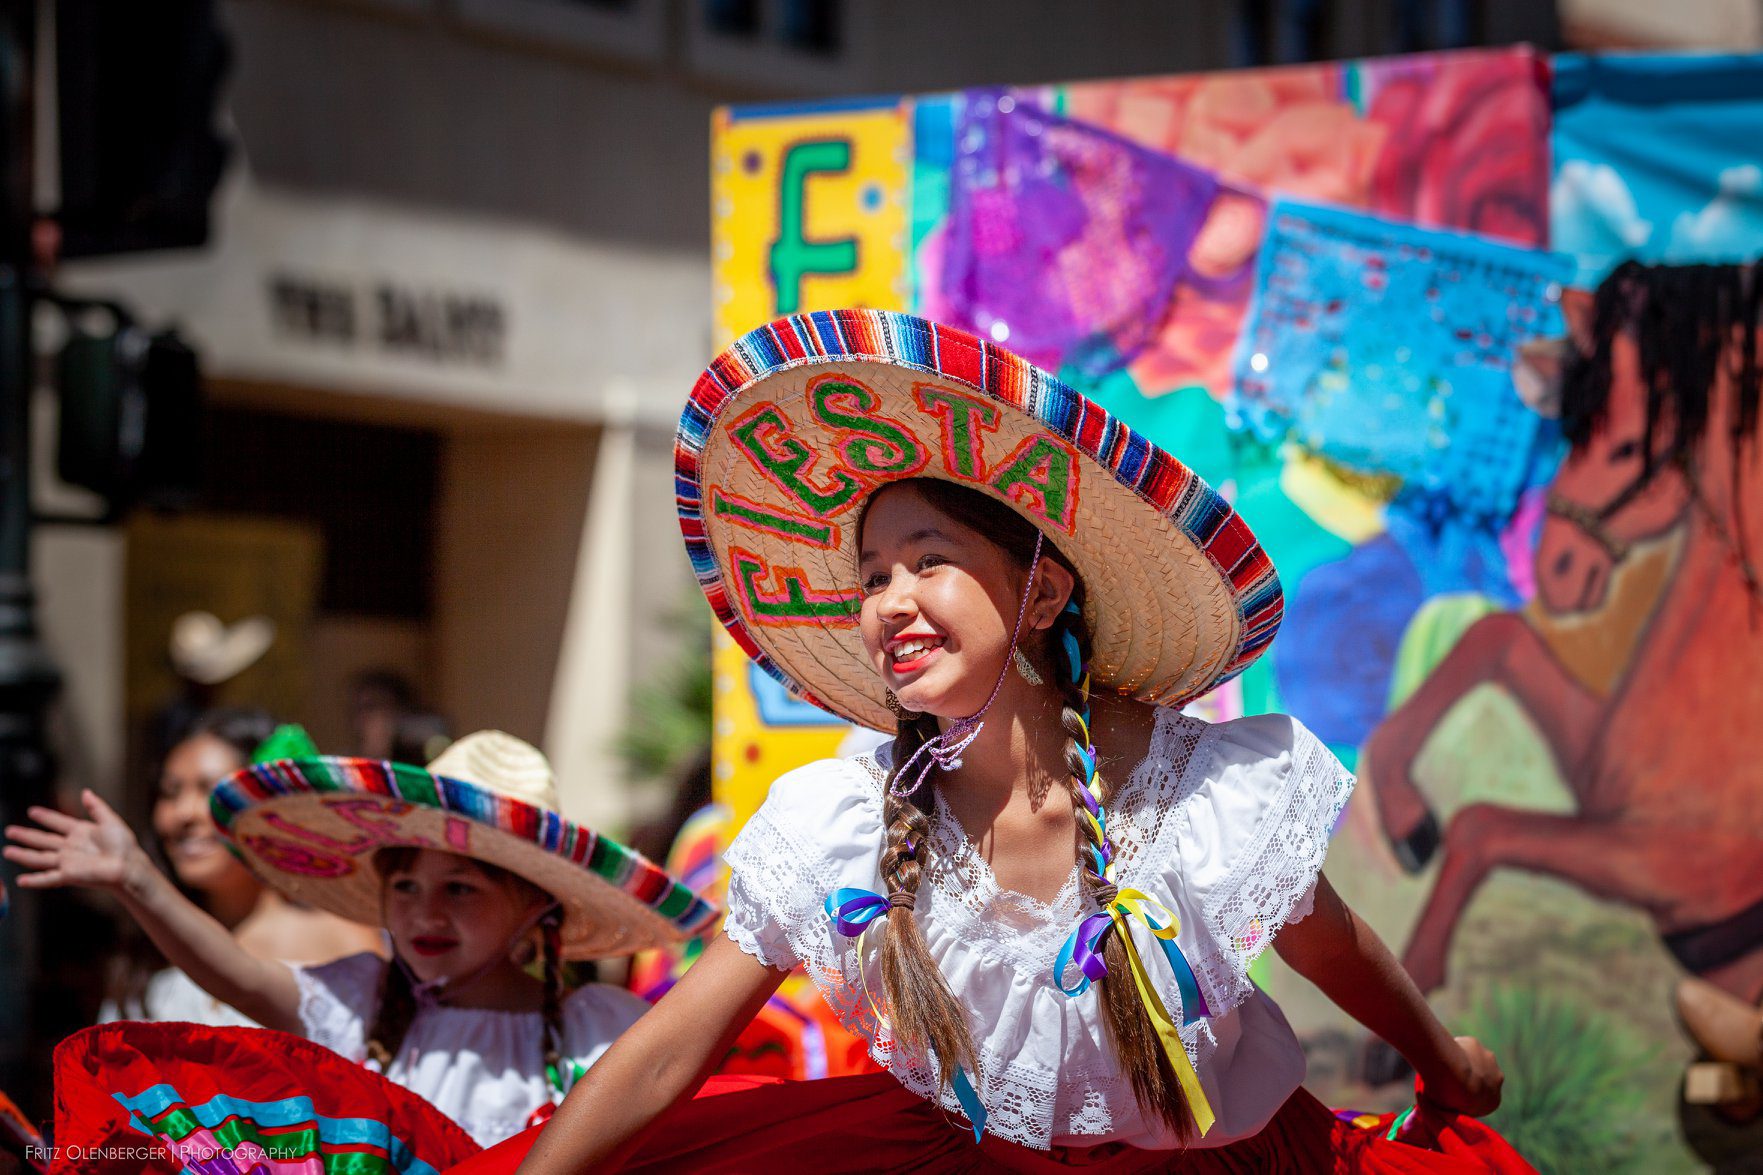 Cinco de Mayo celebrated in U.S., not so much in Mexico